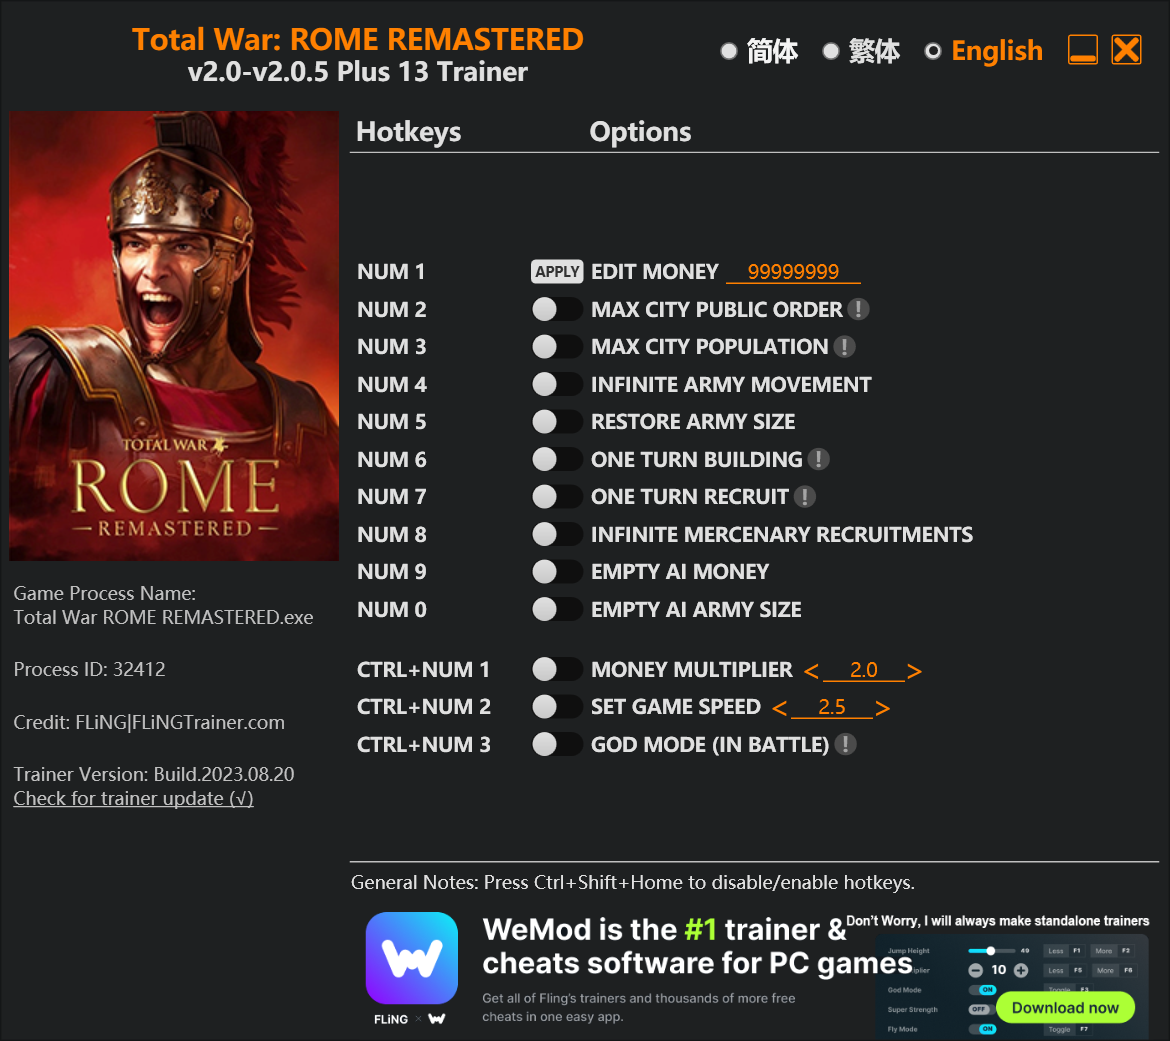 Total War: ROME REMASTERED Trainer/Cheat